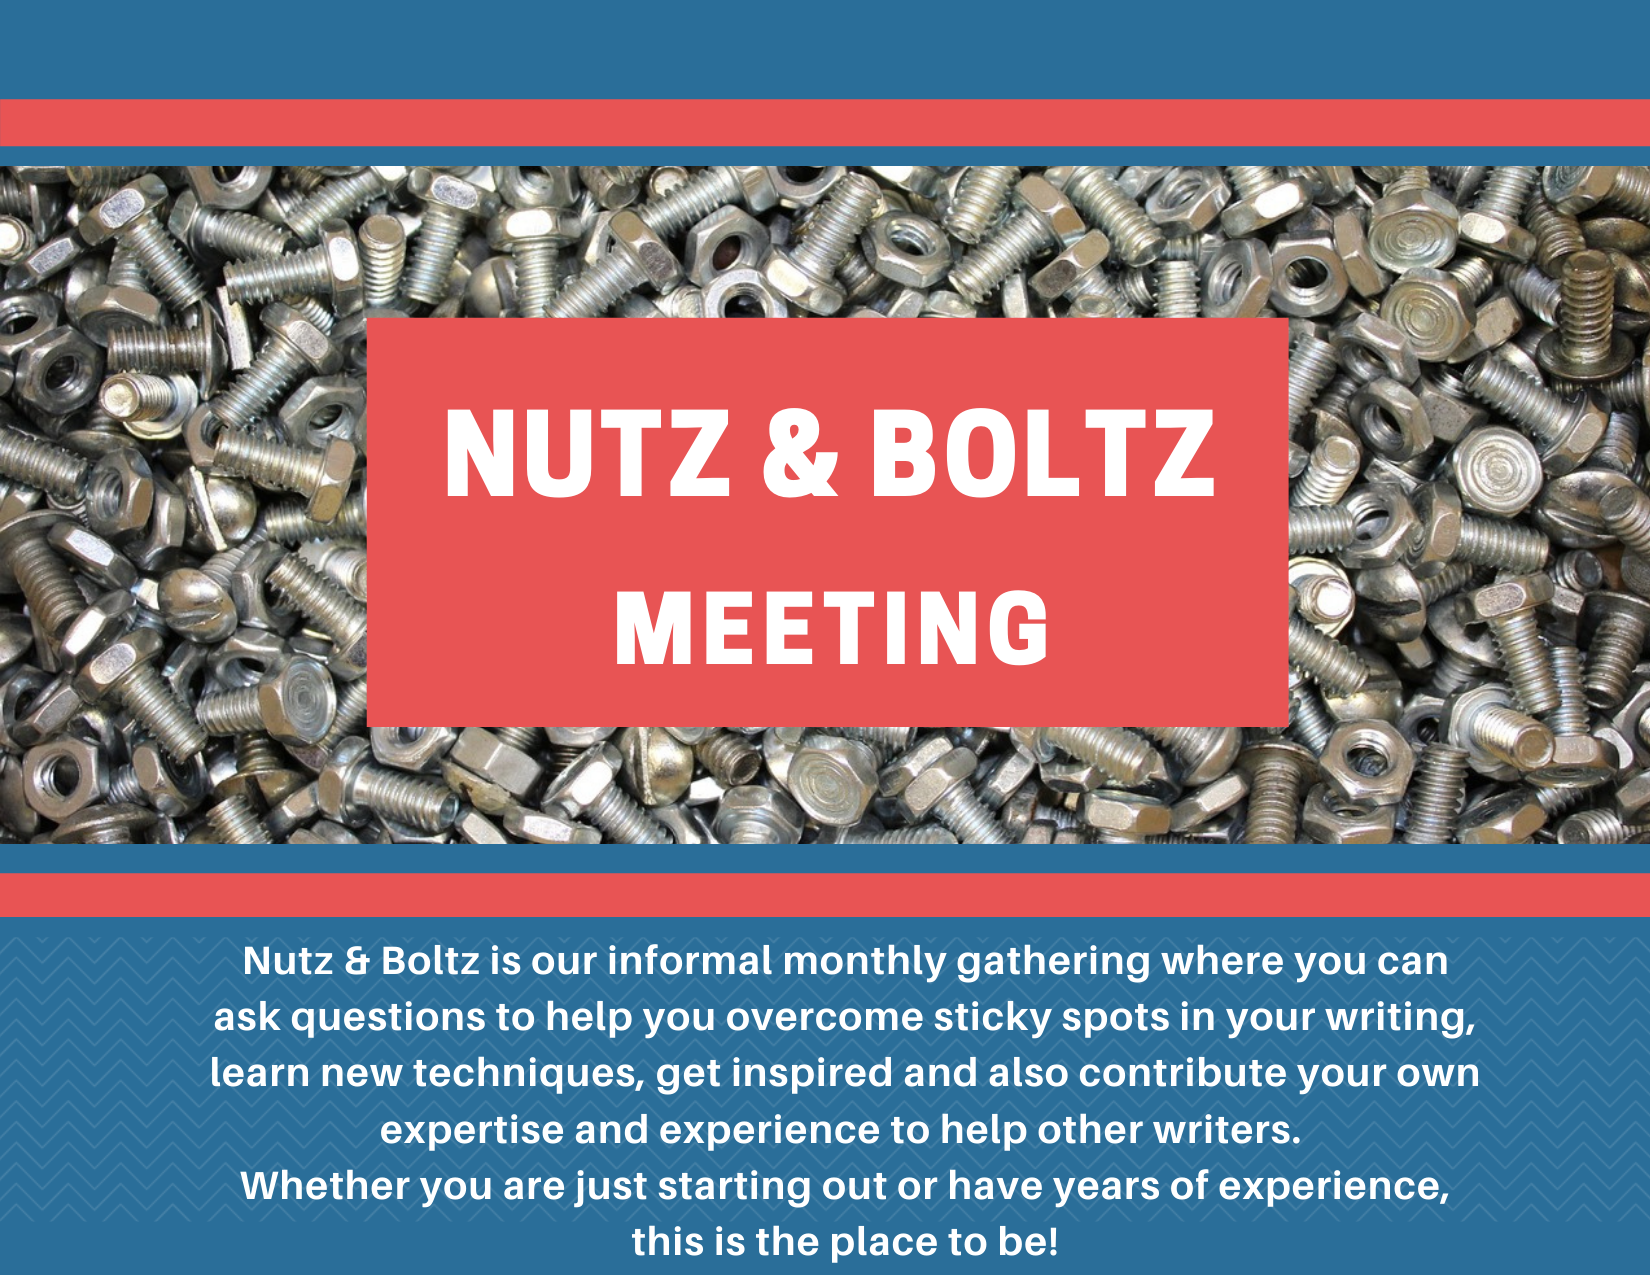 On a dark blue background, a photo of a pile of nuts and bolts is centered between two red stripes. Overlaid on the photo is a red rectangle with the words "Nutz and Boltz Meeting" in white, all-caps letters. At the bottom, in small white letters on the blue background, is a centered block of text, which reads "Nutz & Boltz is our informal monthly gathering where you can ask questions to help you overcome sticky spots in your writing, learn new techniques, get inspired and also contribute your own expertise and experience to help other writers.  Whether you are just starting out or have years of experience, this is the place to be!"